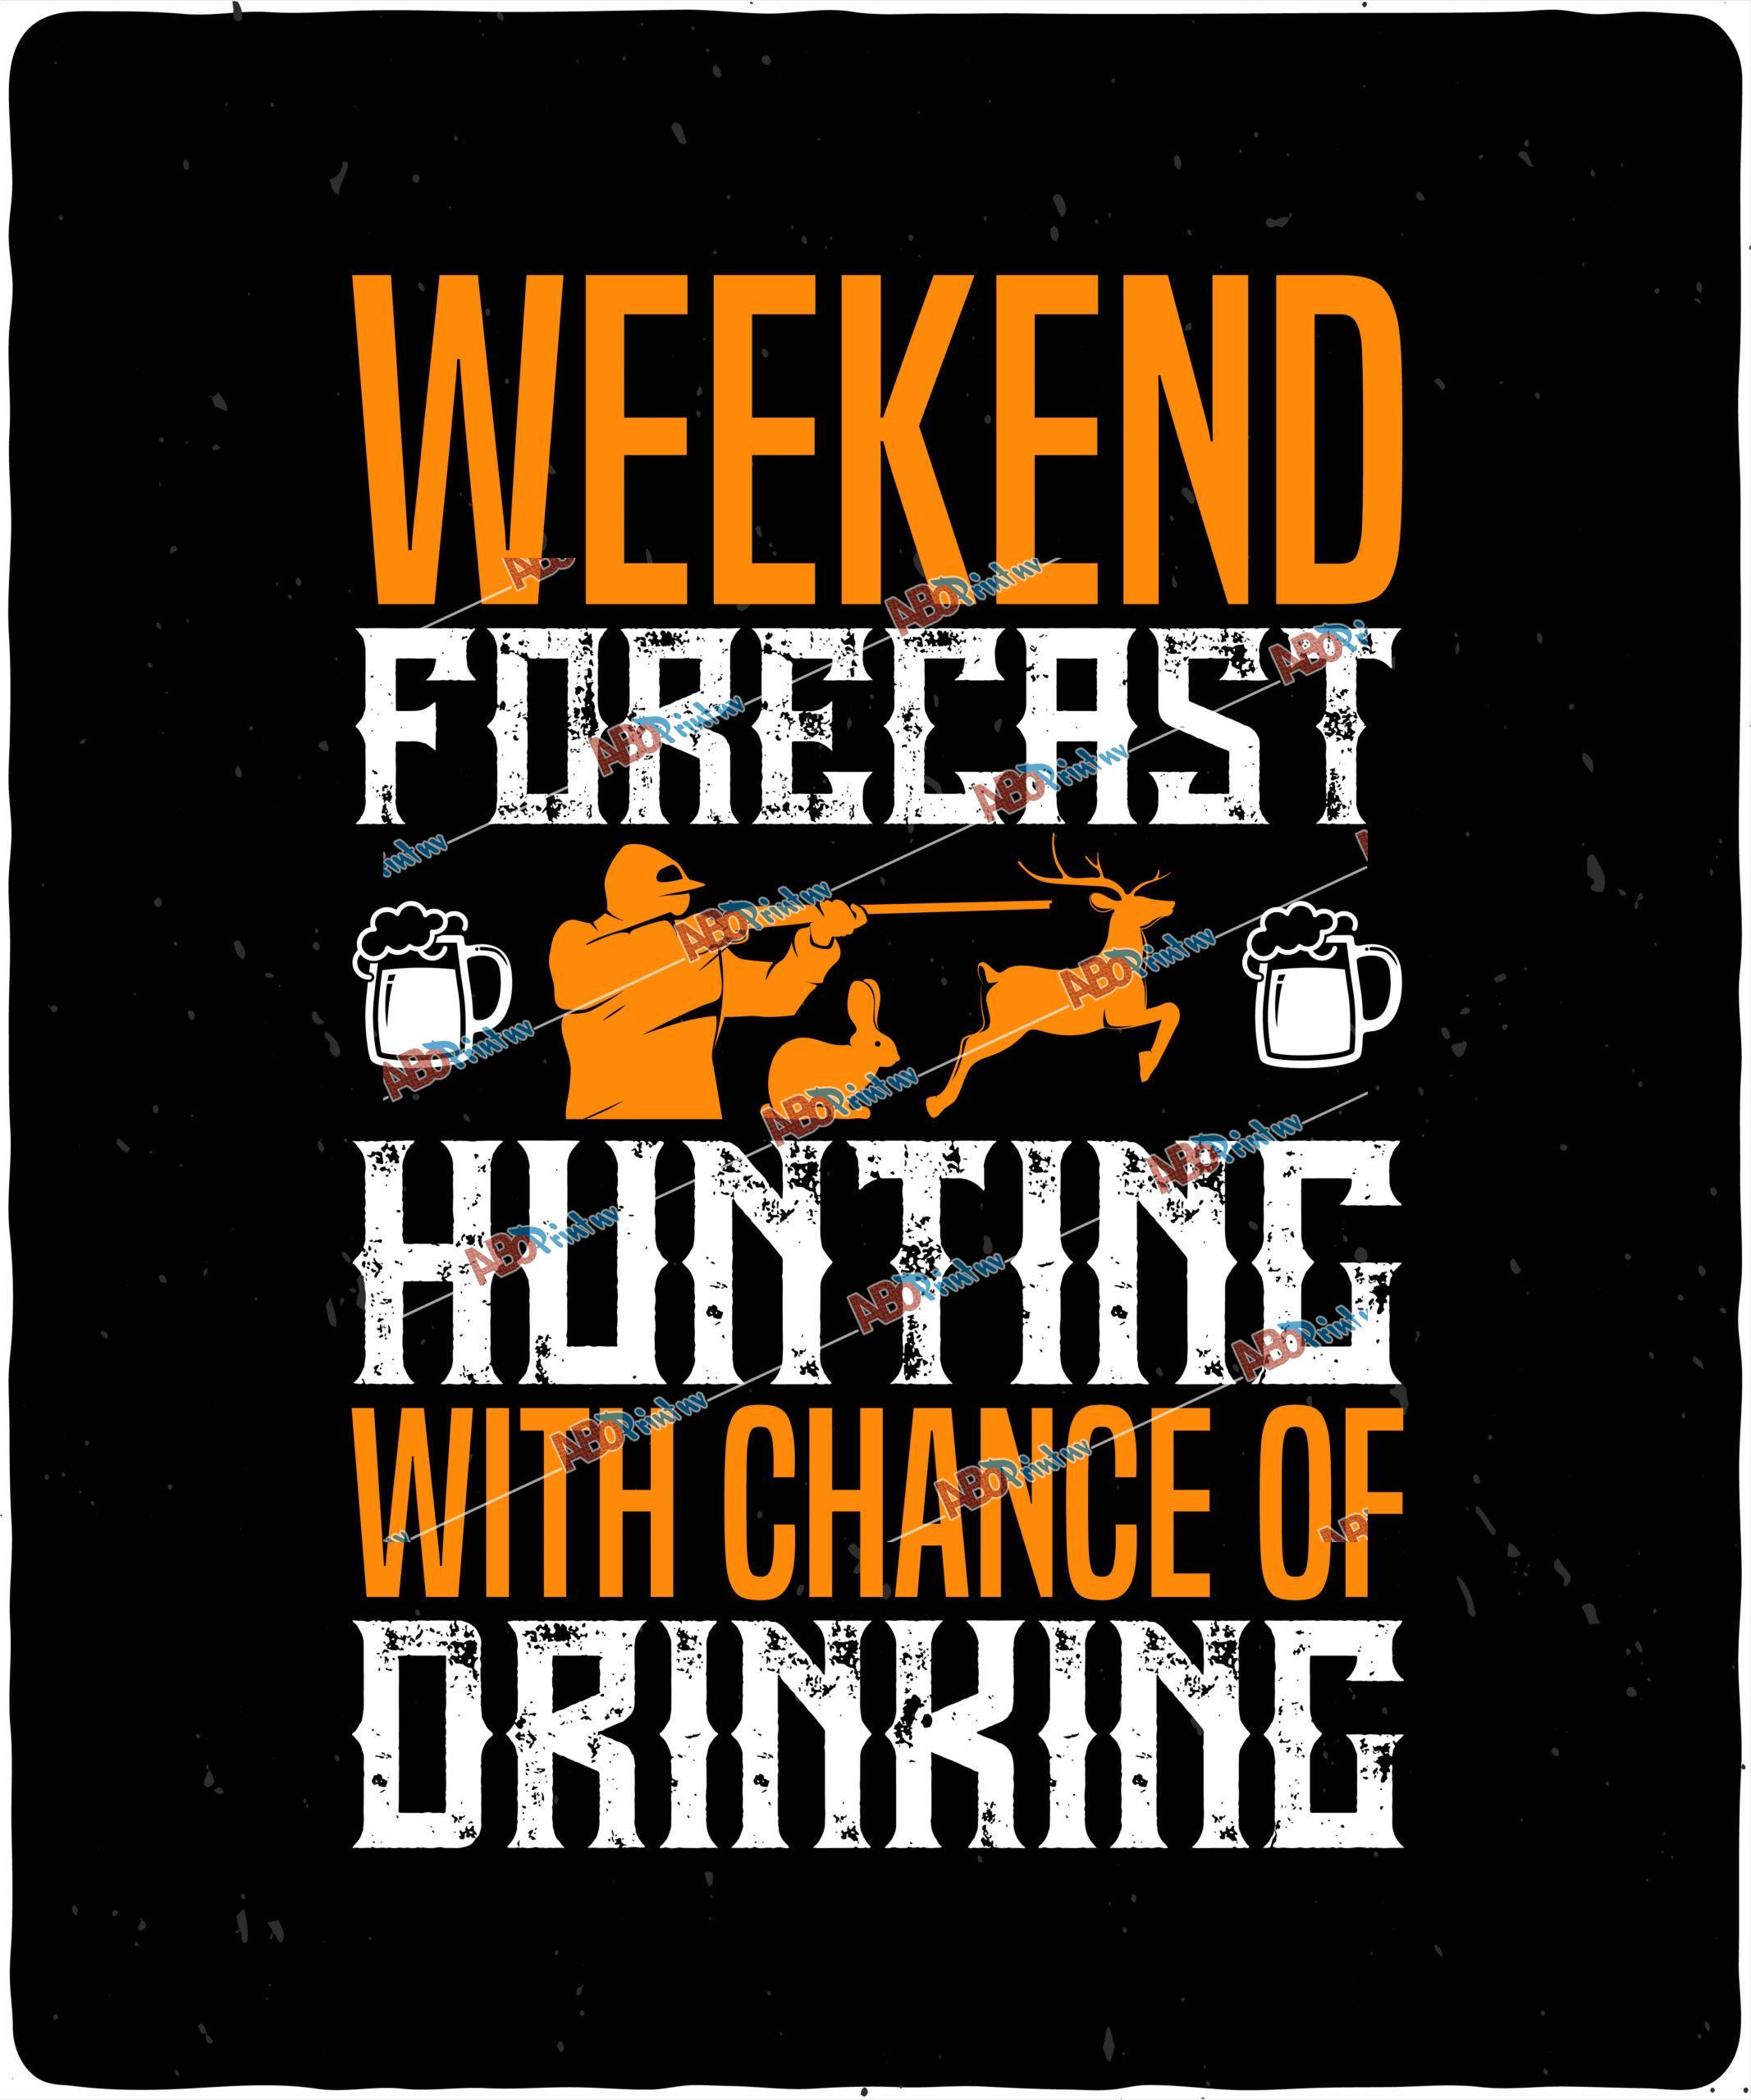 weekend forecast hunting with chance of drinking